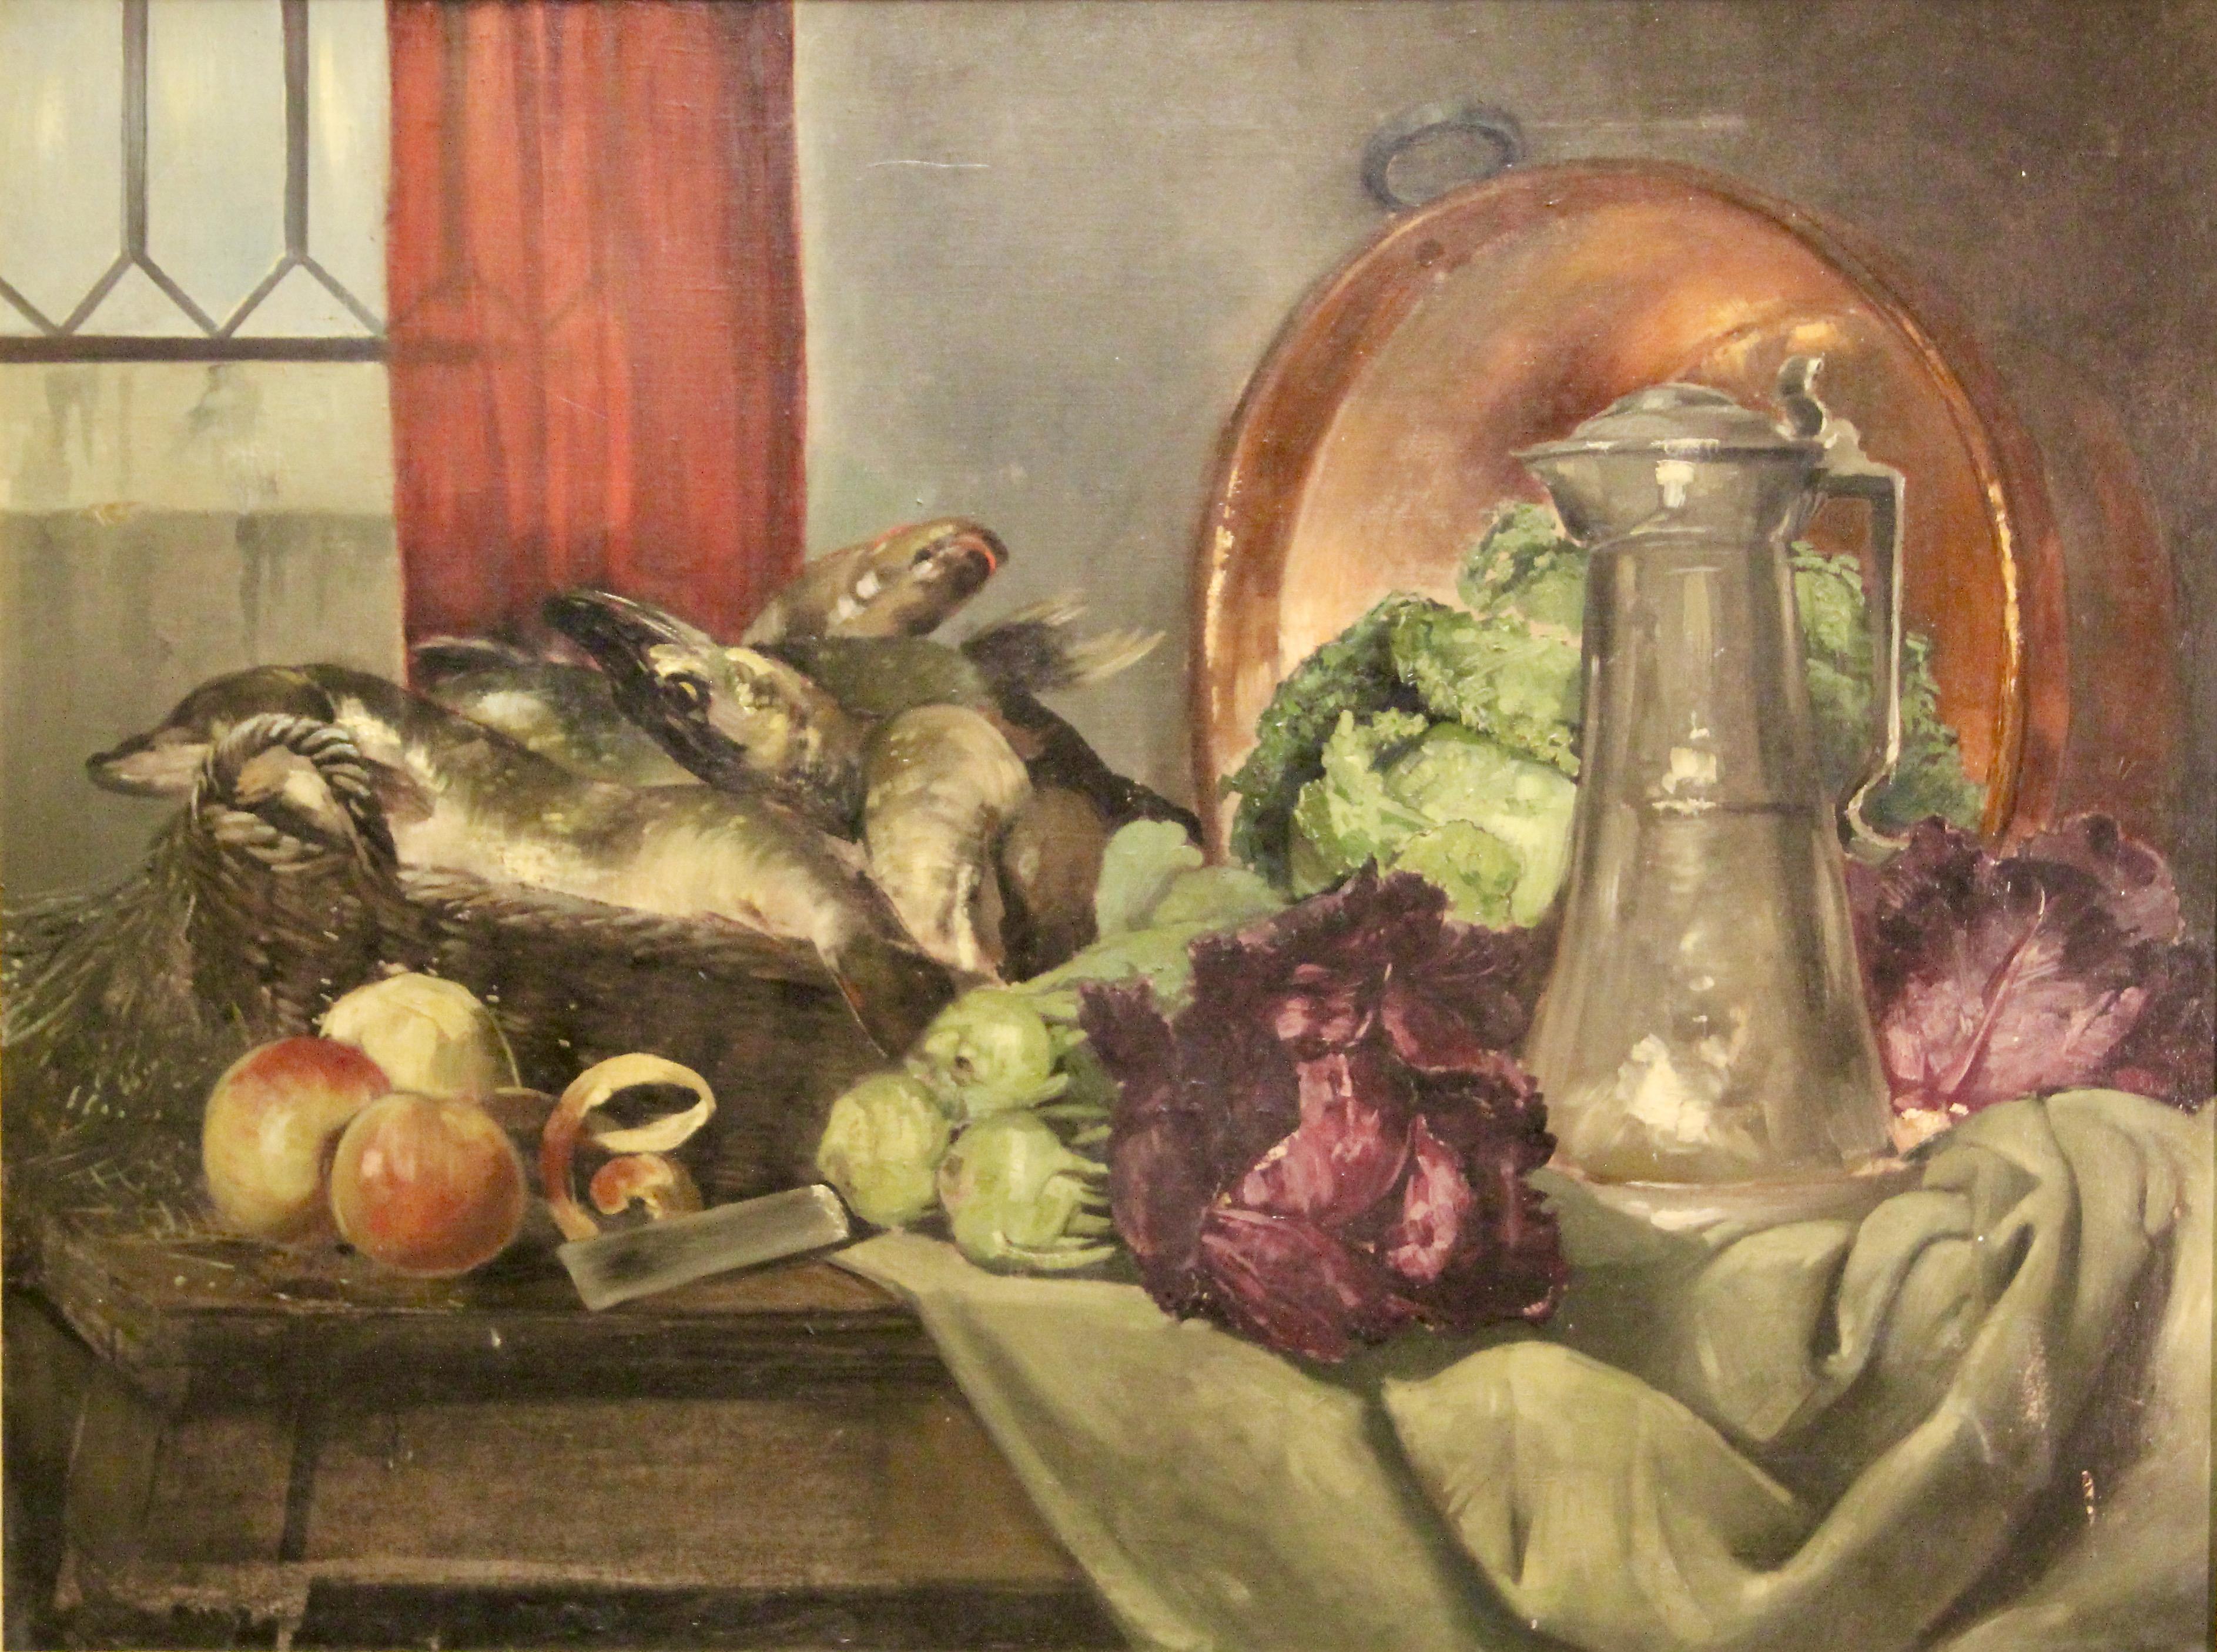 Antique Oil Painting, Still Life with fresh Fish, Apples, Lettuce and Pewter Jug - Brown Still-Life Painting by Unknown